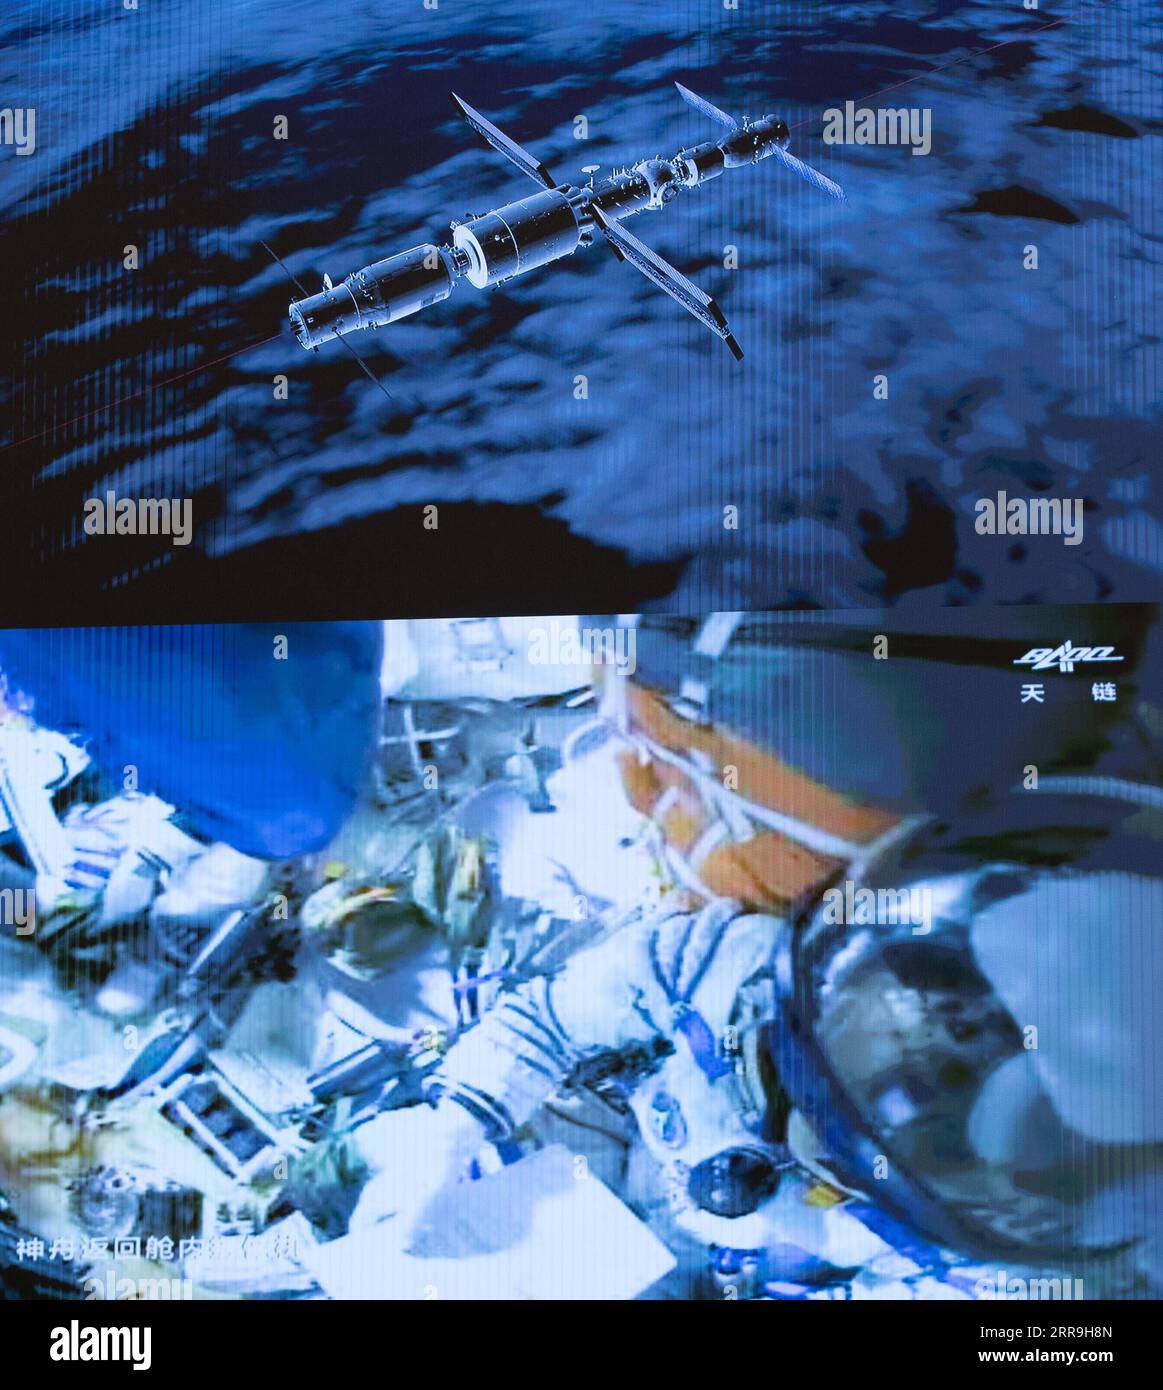 210617 -- BEIJING, June 17, 2021 -- Screen image captured at Beijing Aerospace Control Center in Beijing, capital of China, June 17, 2021 shows China s Shenzhou-12 manned spaceship having successfully docked with the space station core module Tianhe. China s Shenzhou-12 manned spaceship has successfully docked with the space station core module Tianhe on Thursday, according to the China Manned Space Agency CMSA. The spaceship, launched on Thursday morning, completed orbital status setting after entering the orbit and conducted a fast autonomous rendezvous and docking with the front docking por Stock Photo